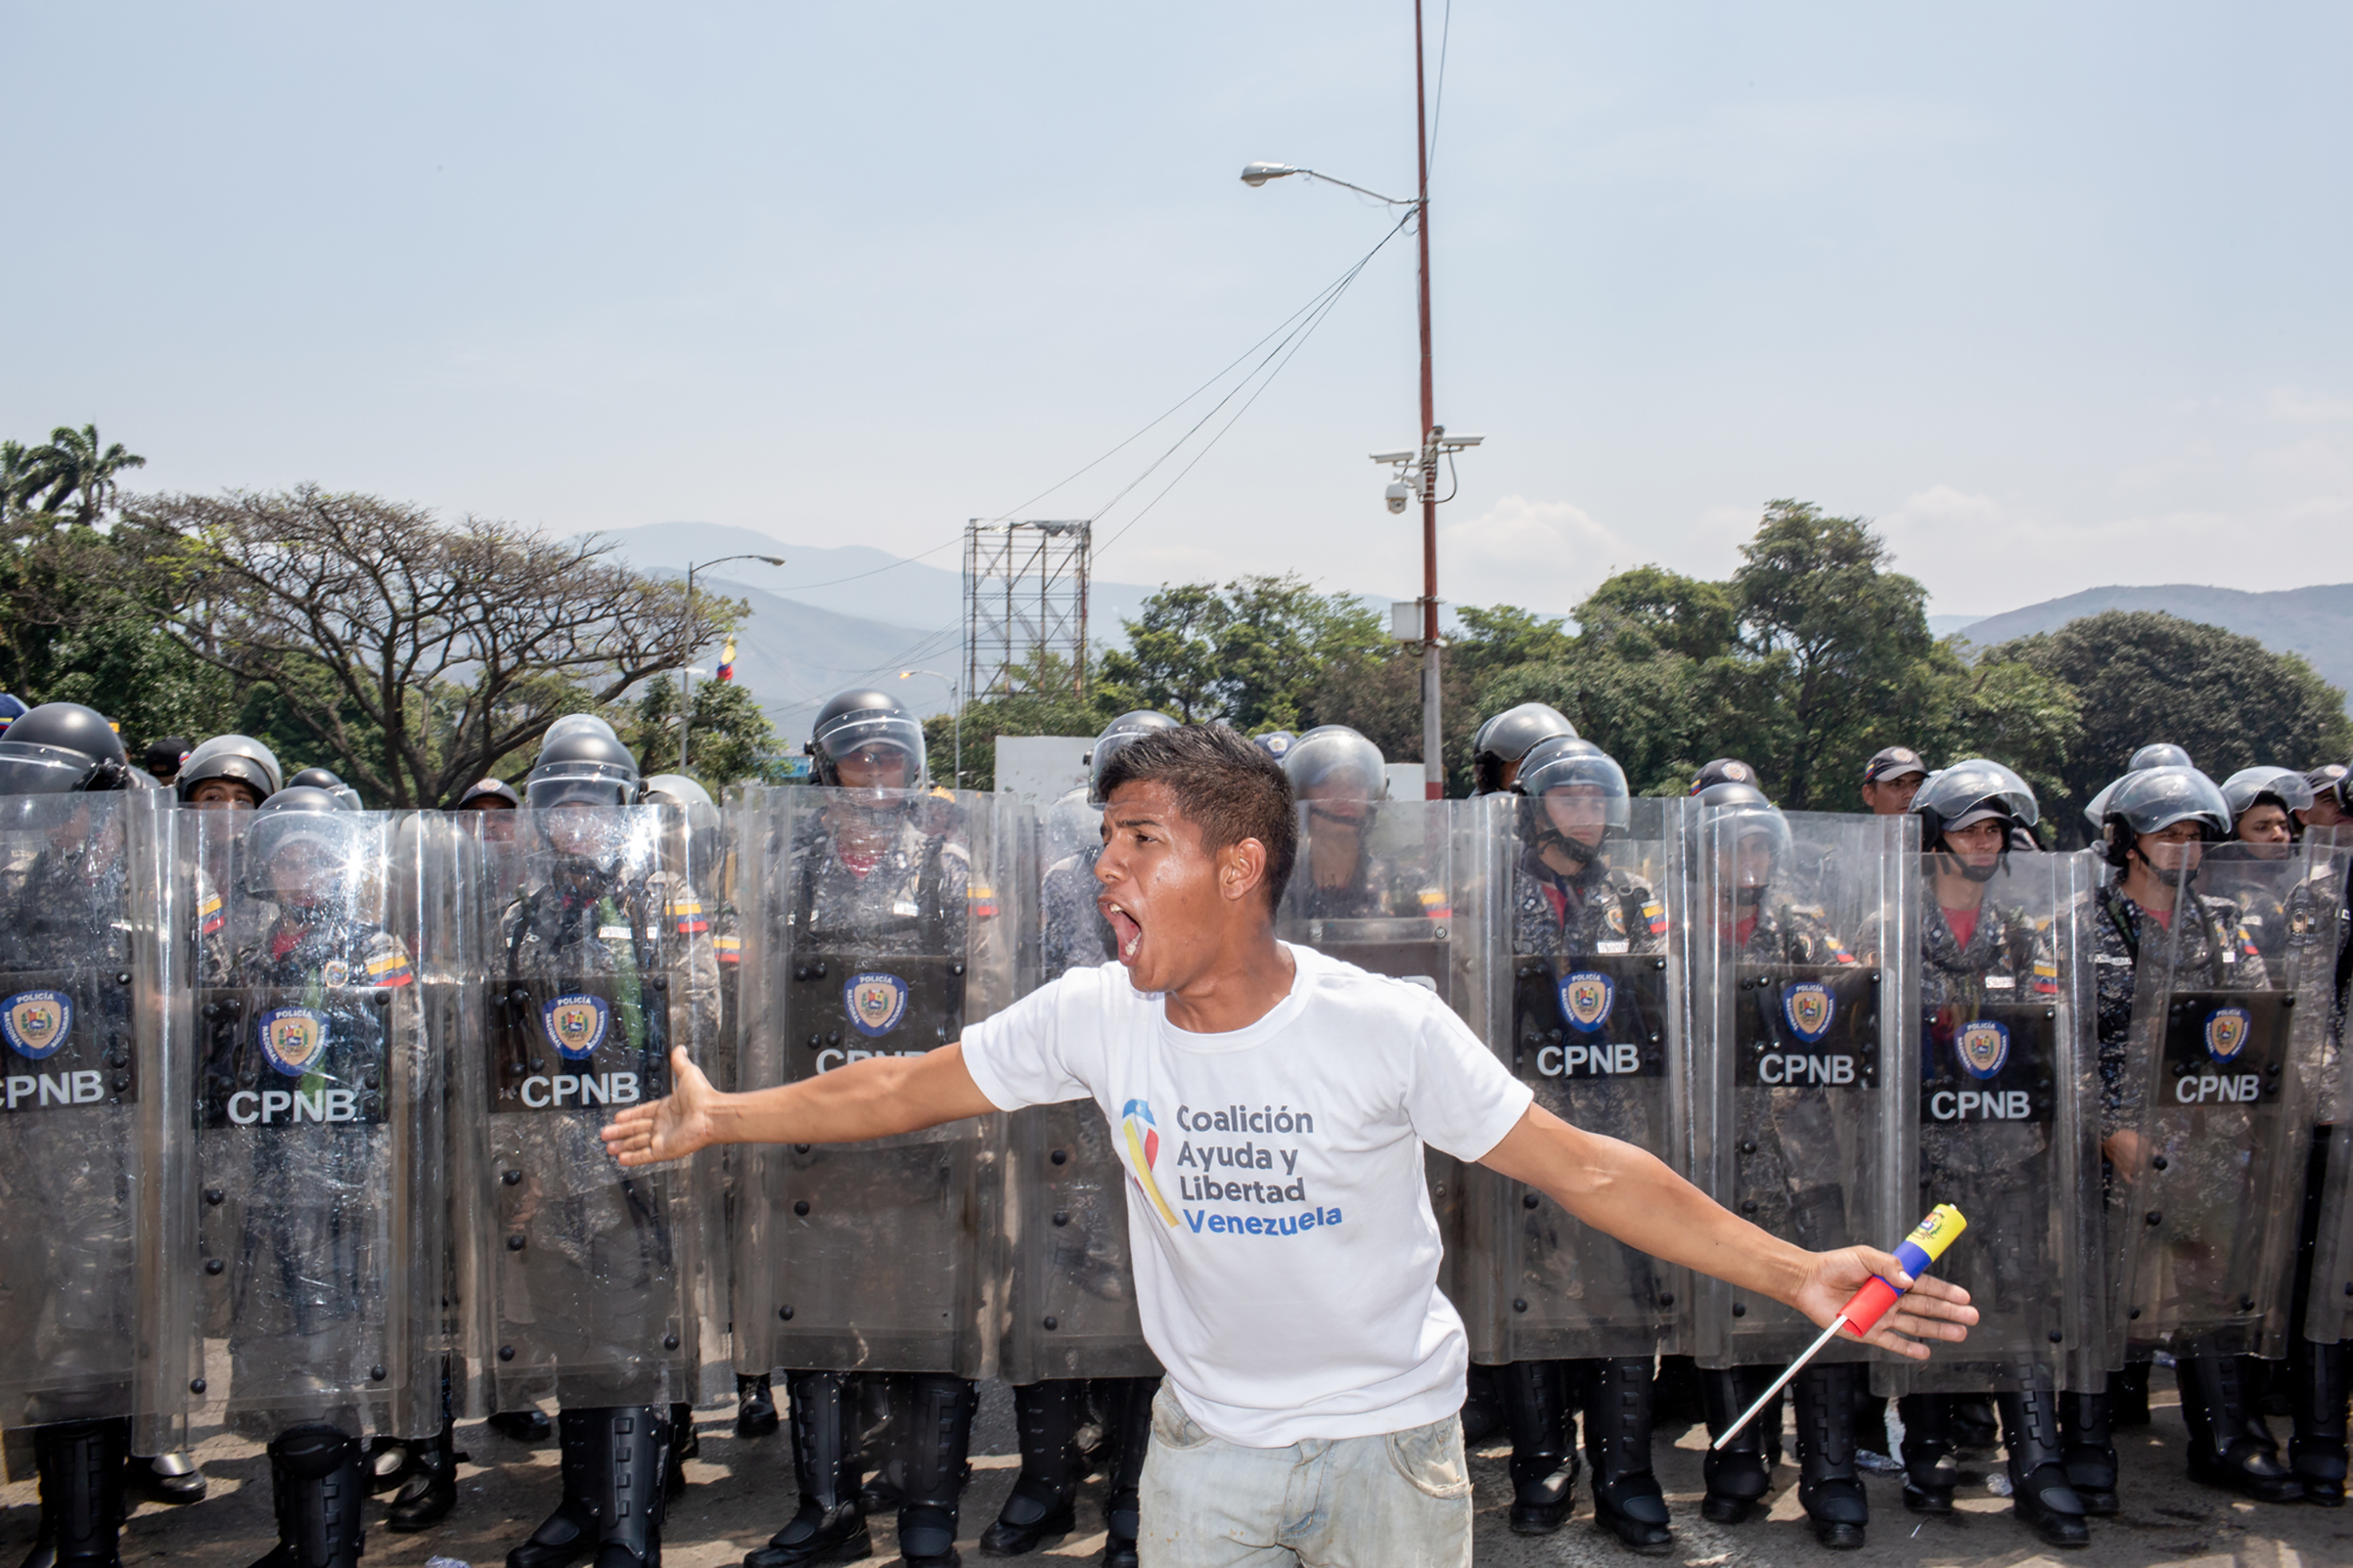 A demonstrator yells in front of Venezuelan national police officers before a clash on the bridge. (Photograph by TIME)